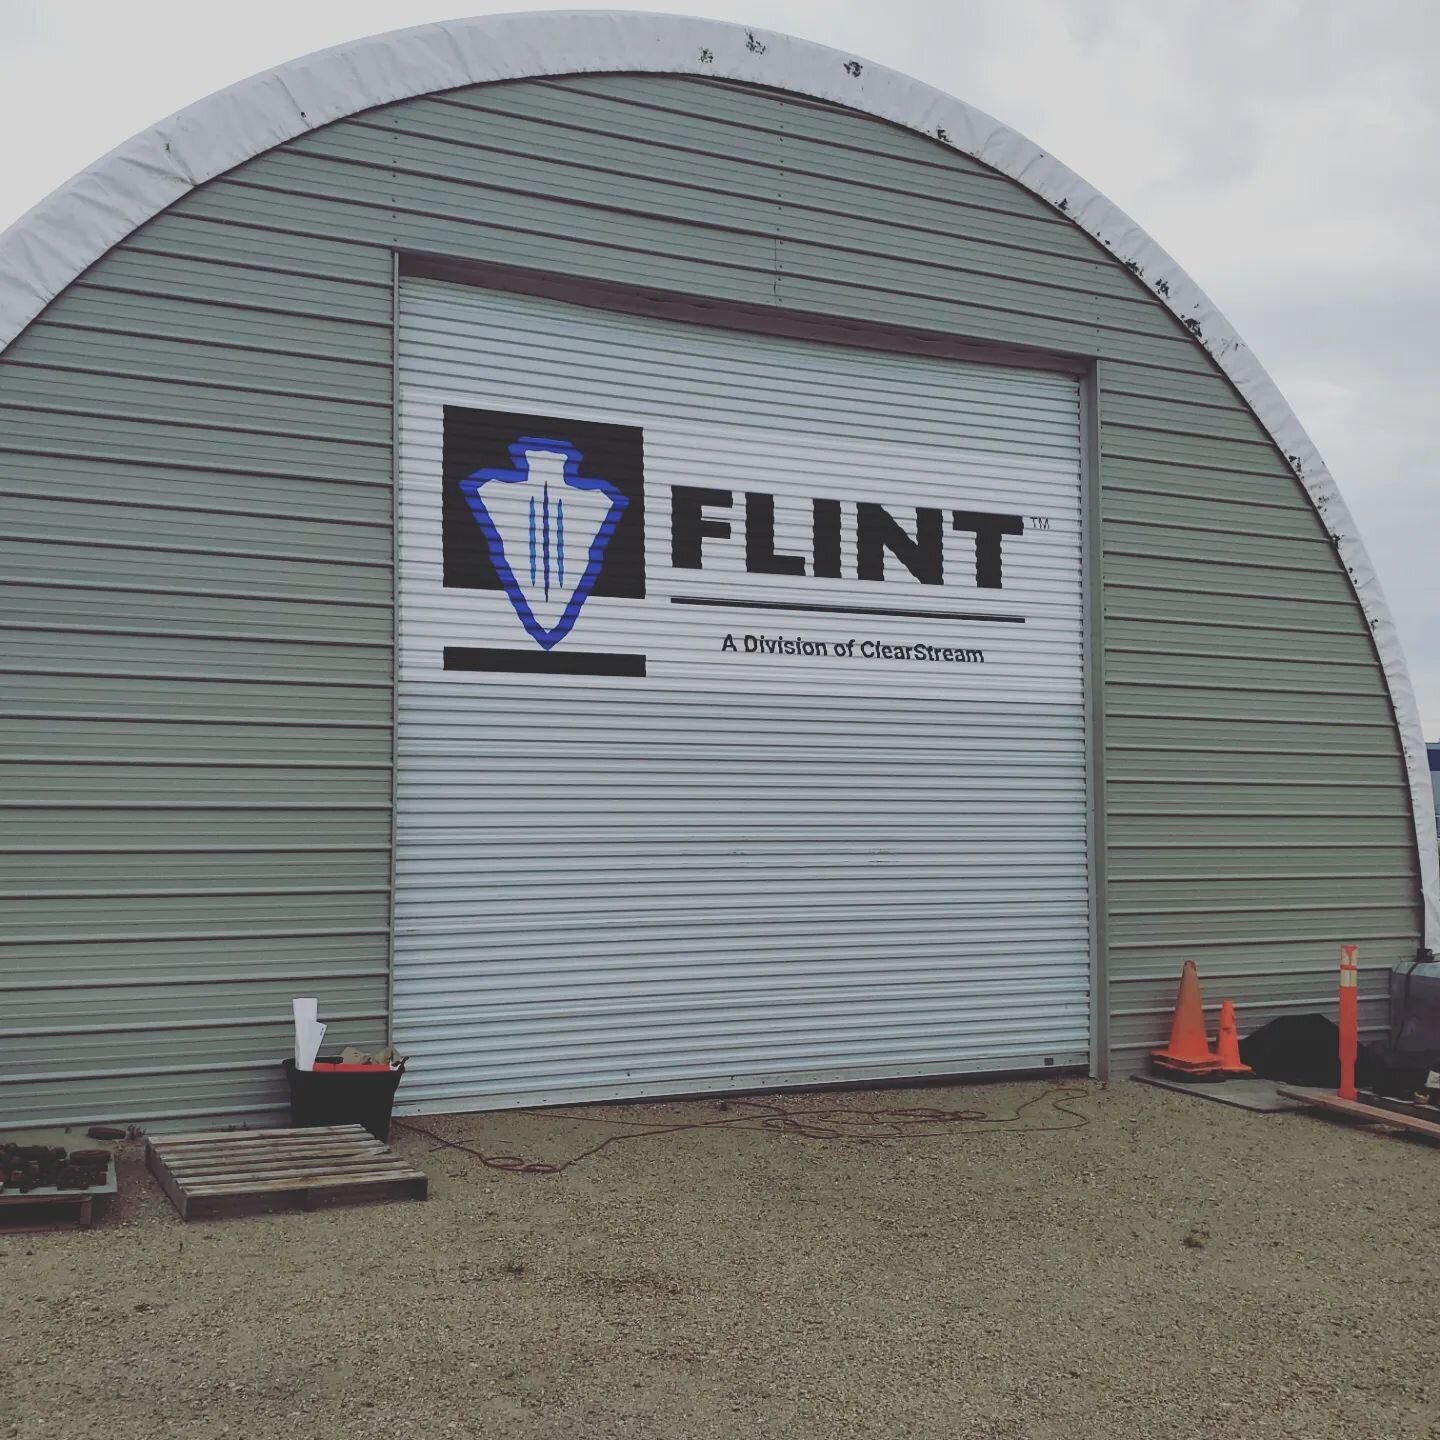 Get noticed with BIG wraps! Here's a nice door wrap we did for our friends at FLINT to increase their visibility from the highway. #vinylwrap #campvinyl #yeg